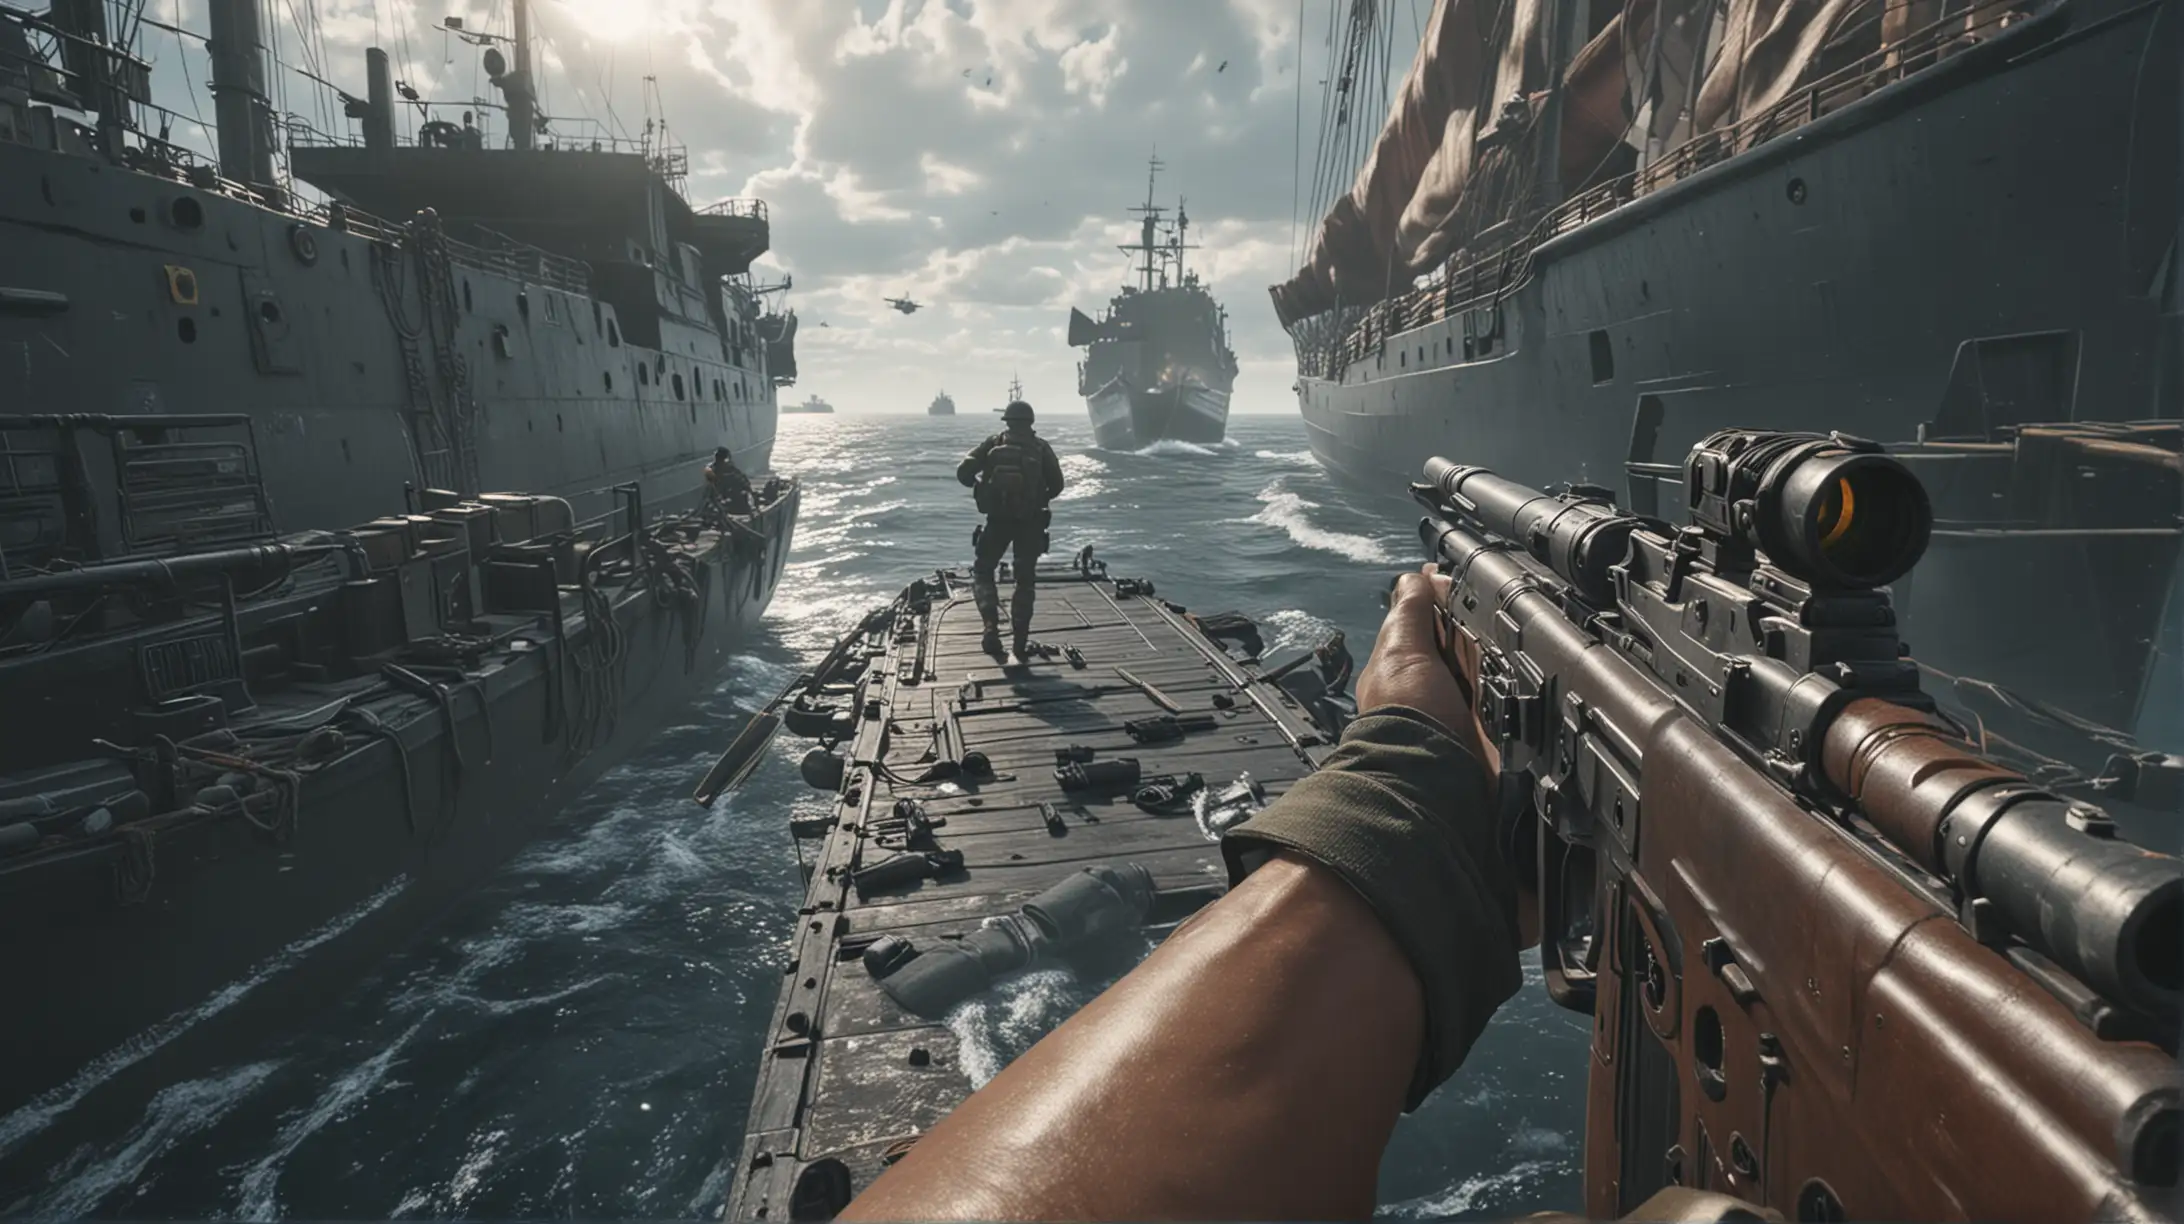 Soldier on Ship Firing Weapon in First Person Perspective